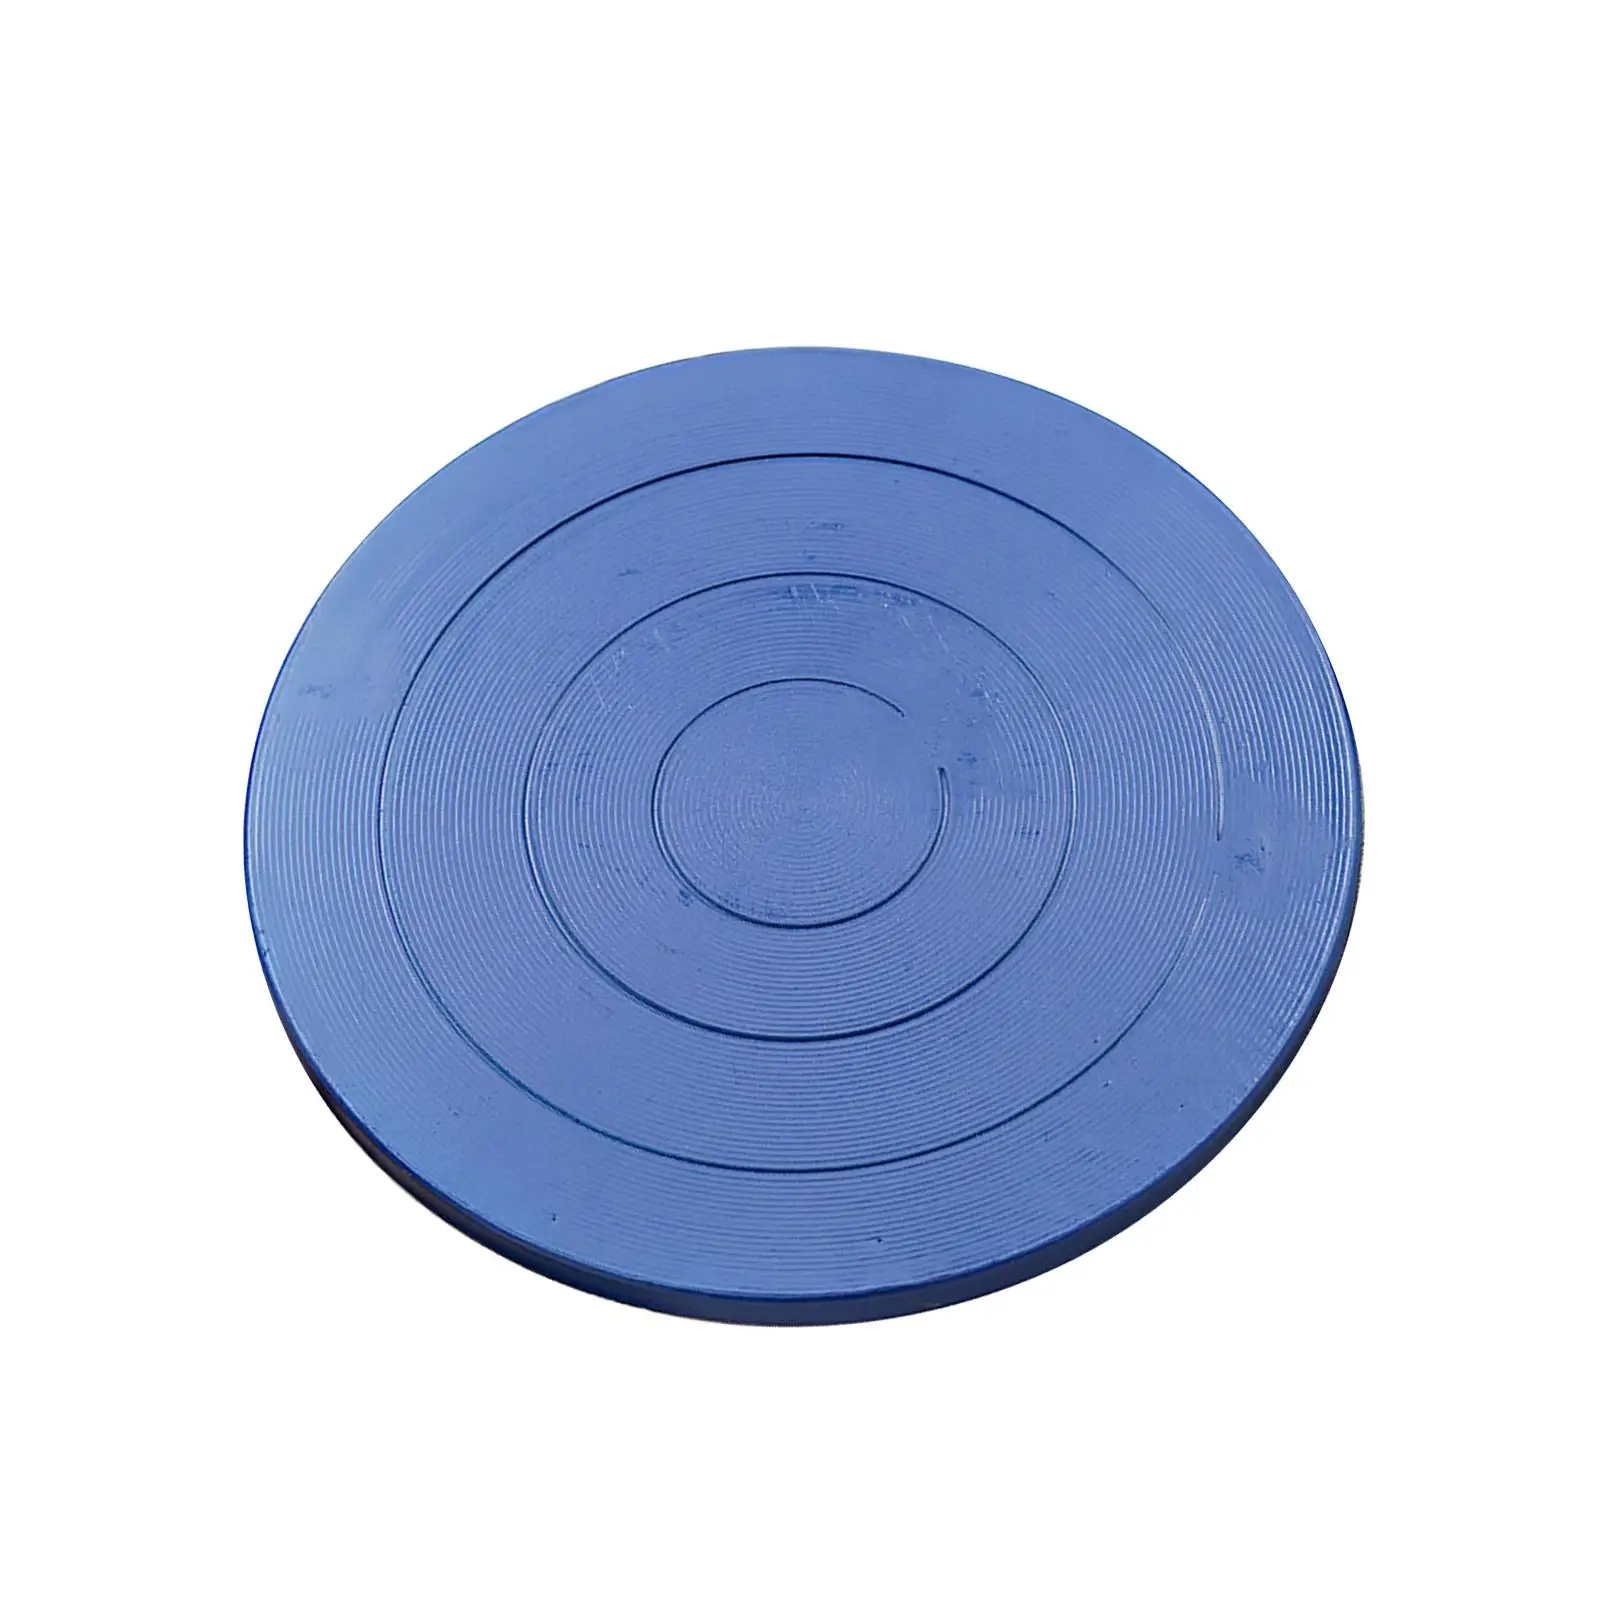 Pottery Turntable Wheel for Sculpting Banding Wheel Rotating Cake Turntable